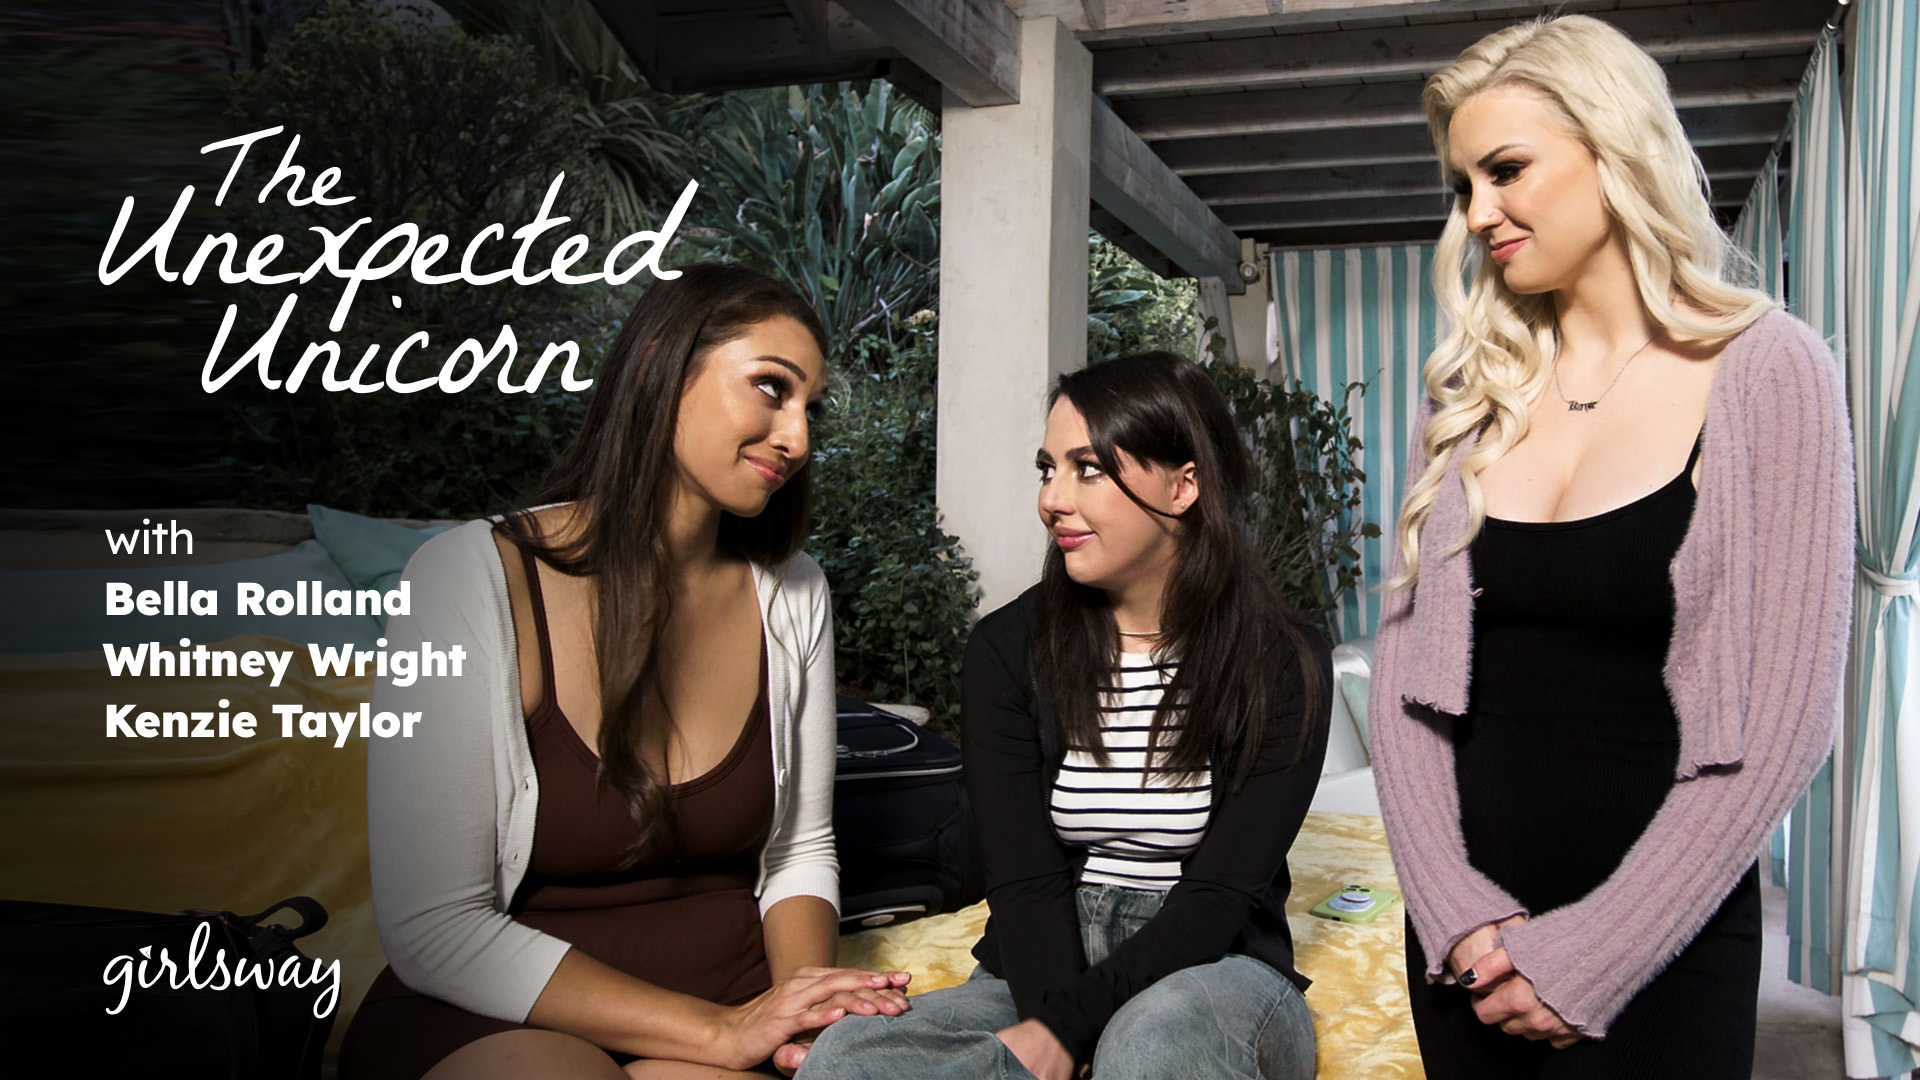 GirlsWay Kenzie Taylor, Whitney Wright, Bella Rolland – The Unexpected Unicorn